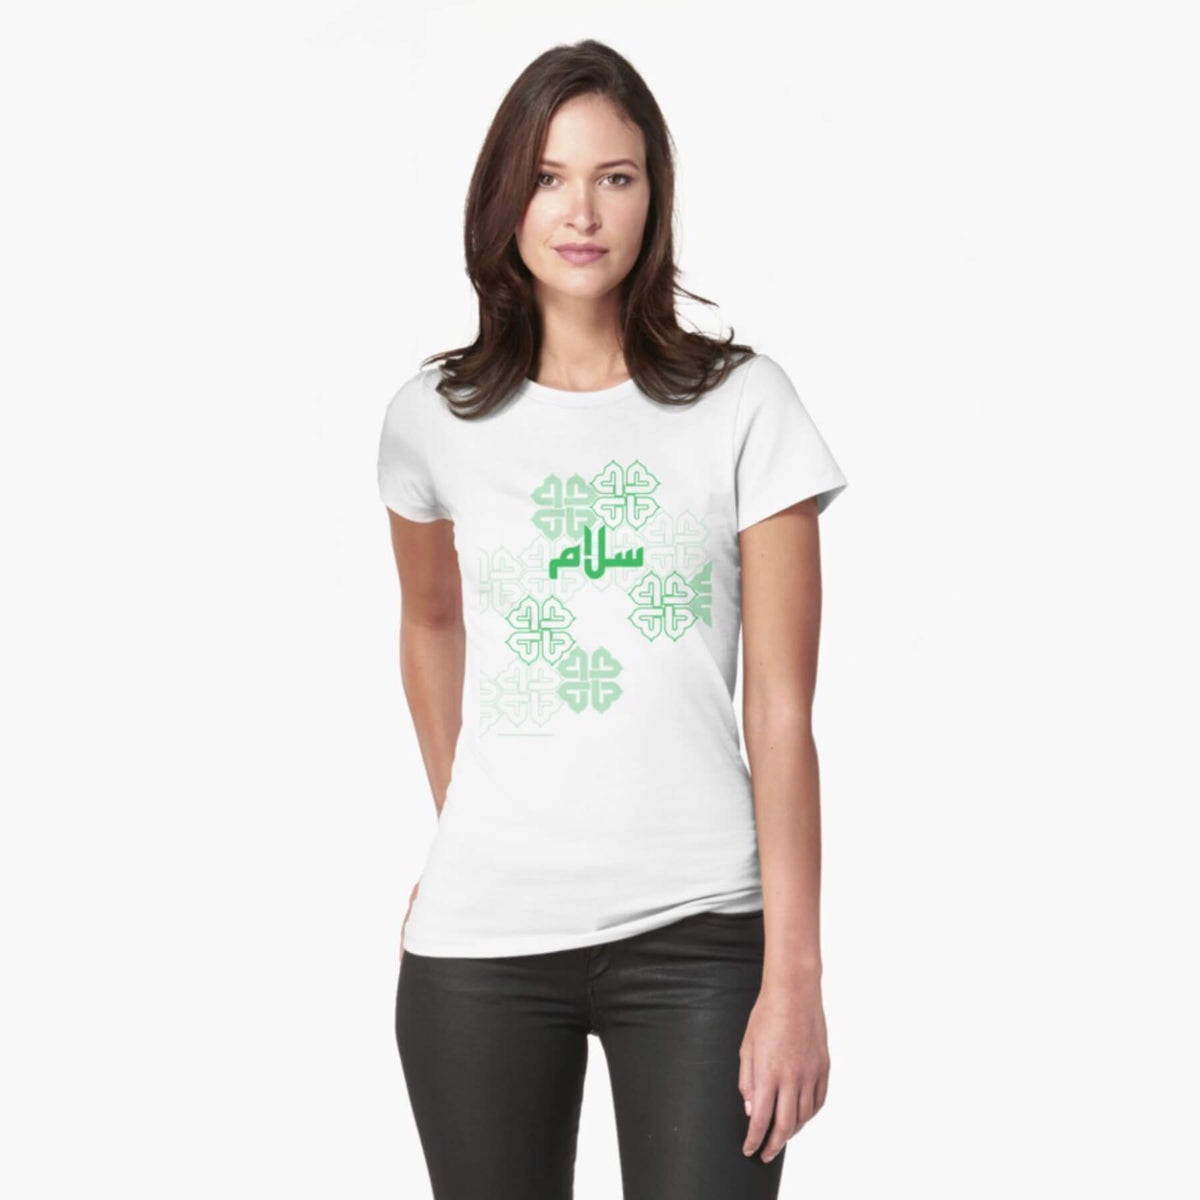 A white female model with hazel eyes and mid-brown shoulder length hair wears the Haluna Happy Names exclusive &#39;Salaam—Arabic Key Words&#39; design white fitted t-shirt and a pair of tight black jeans. The word &#39;salaam&#39; is written on the tshirt in green in Arabic using a kufic-style font, across the chest of the model against a complementary green patterned background print. The tshirt ends at the woman&#39;s hips and the image cuts off mid-thigh. 